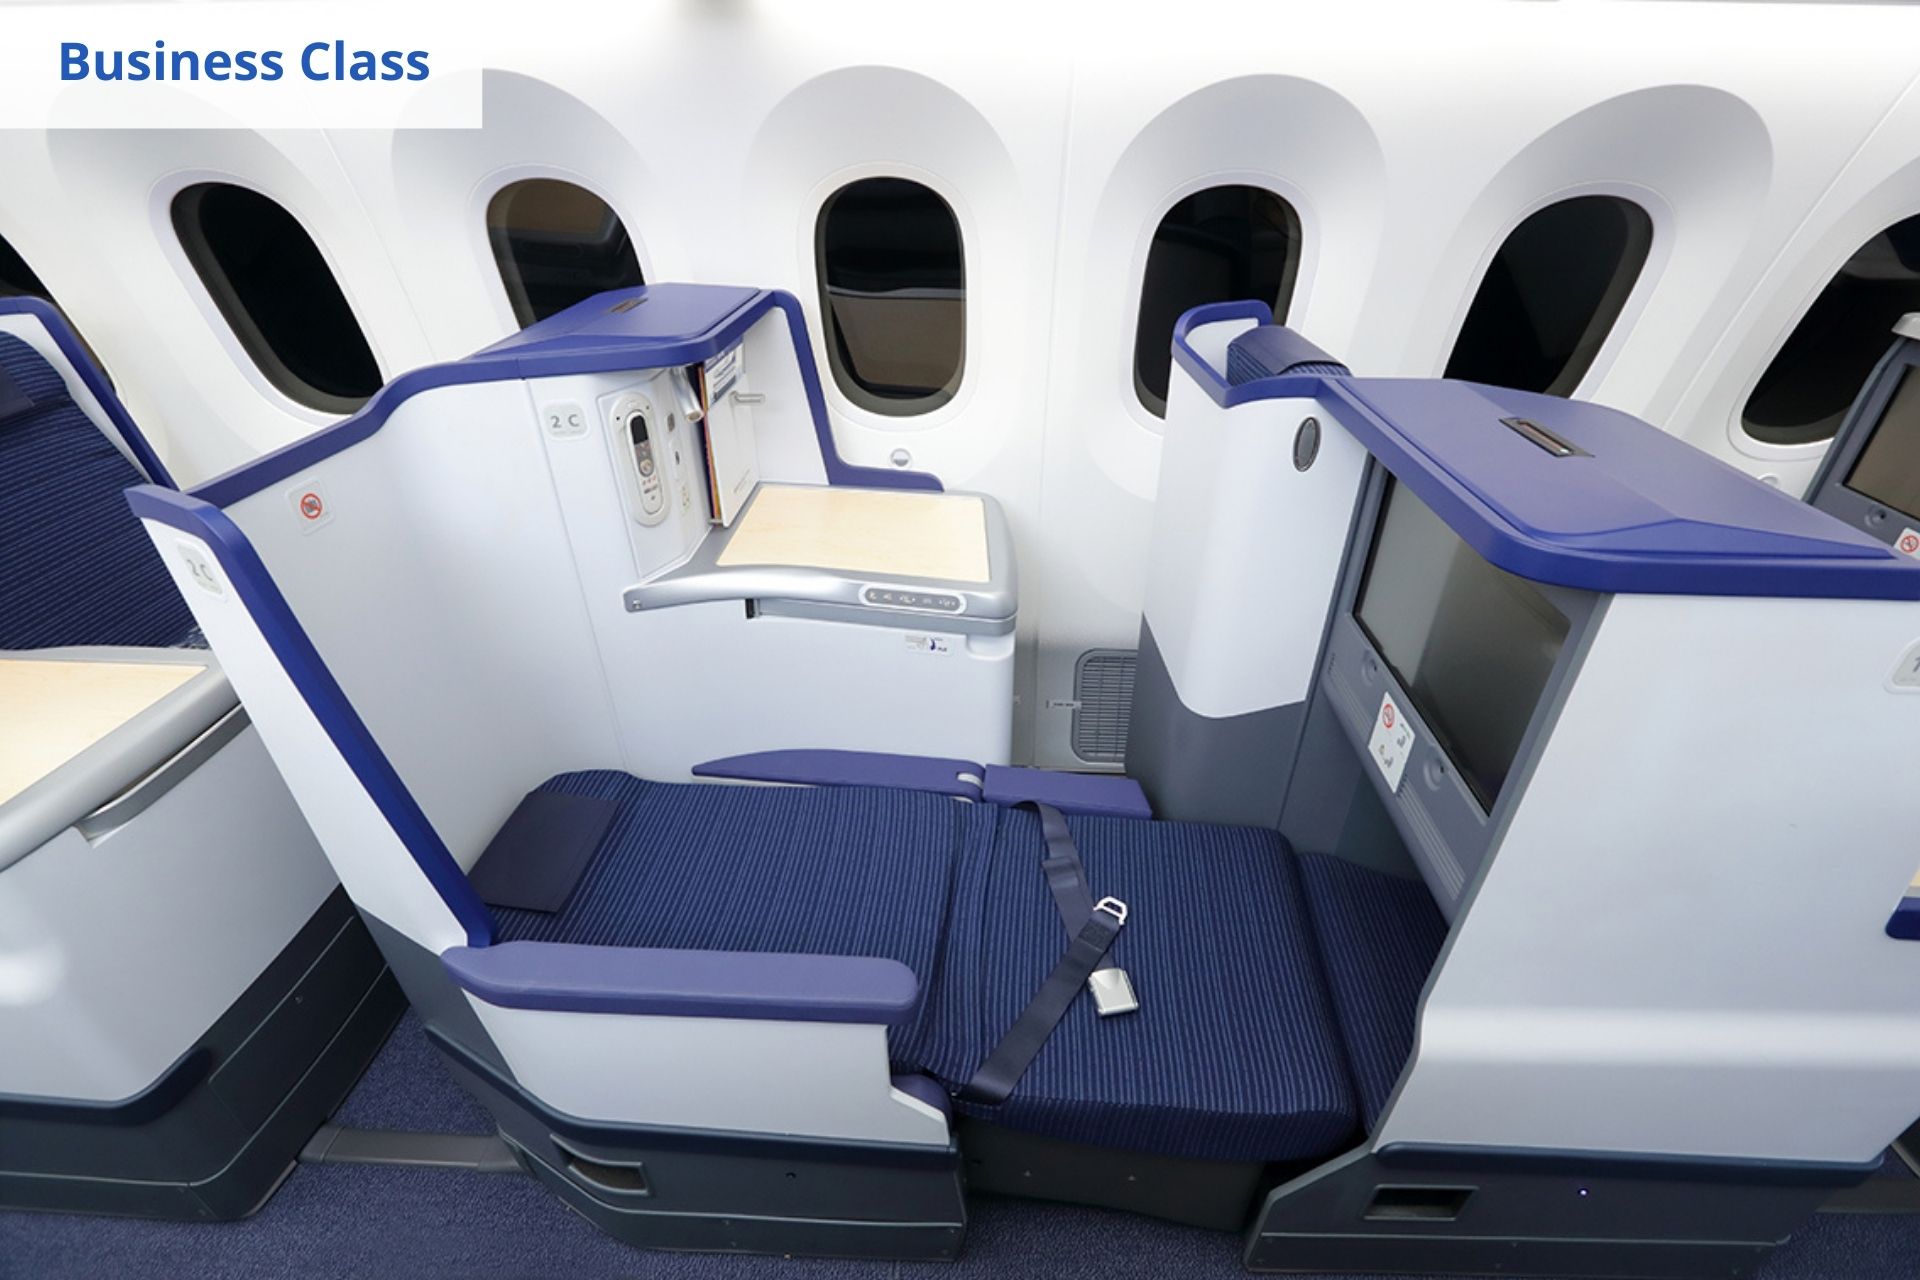 ANA airlines Business Class